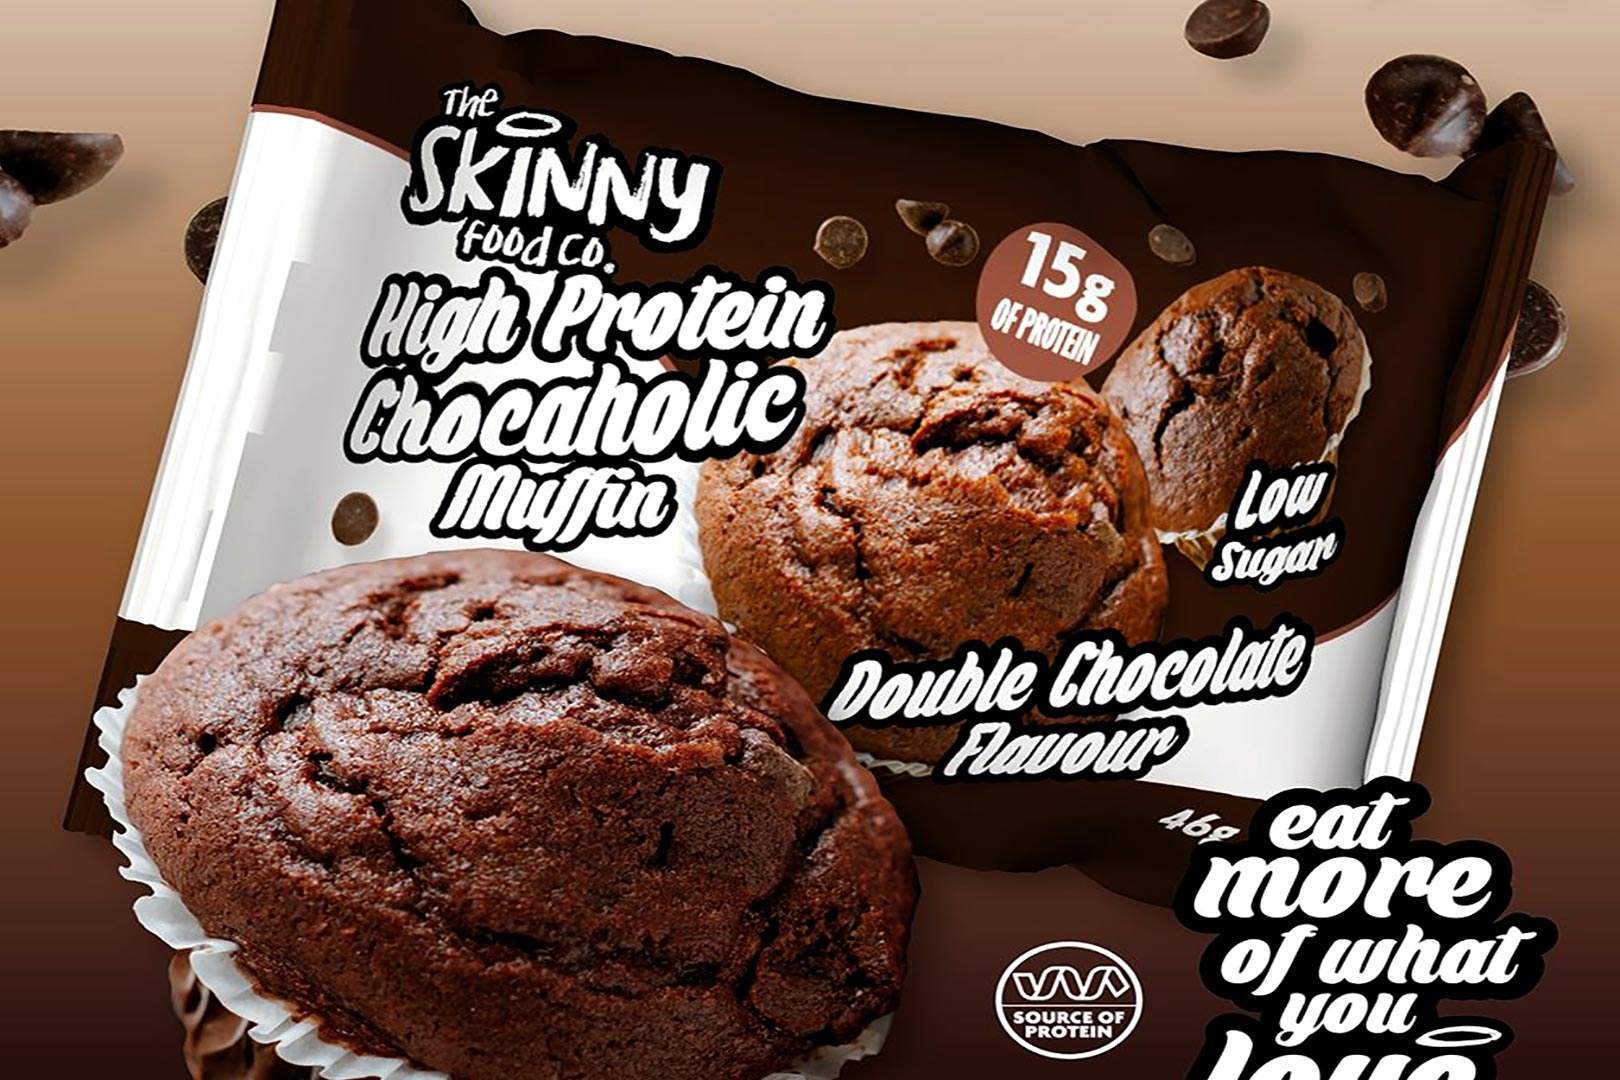 The Skinny Food Co High Protein Chocaholic Muffin